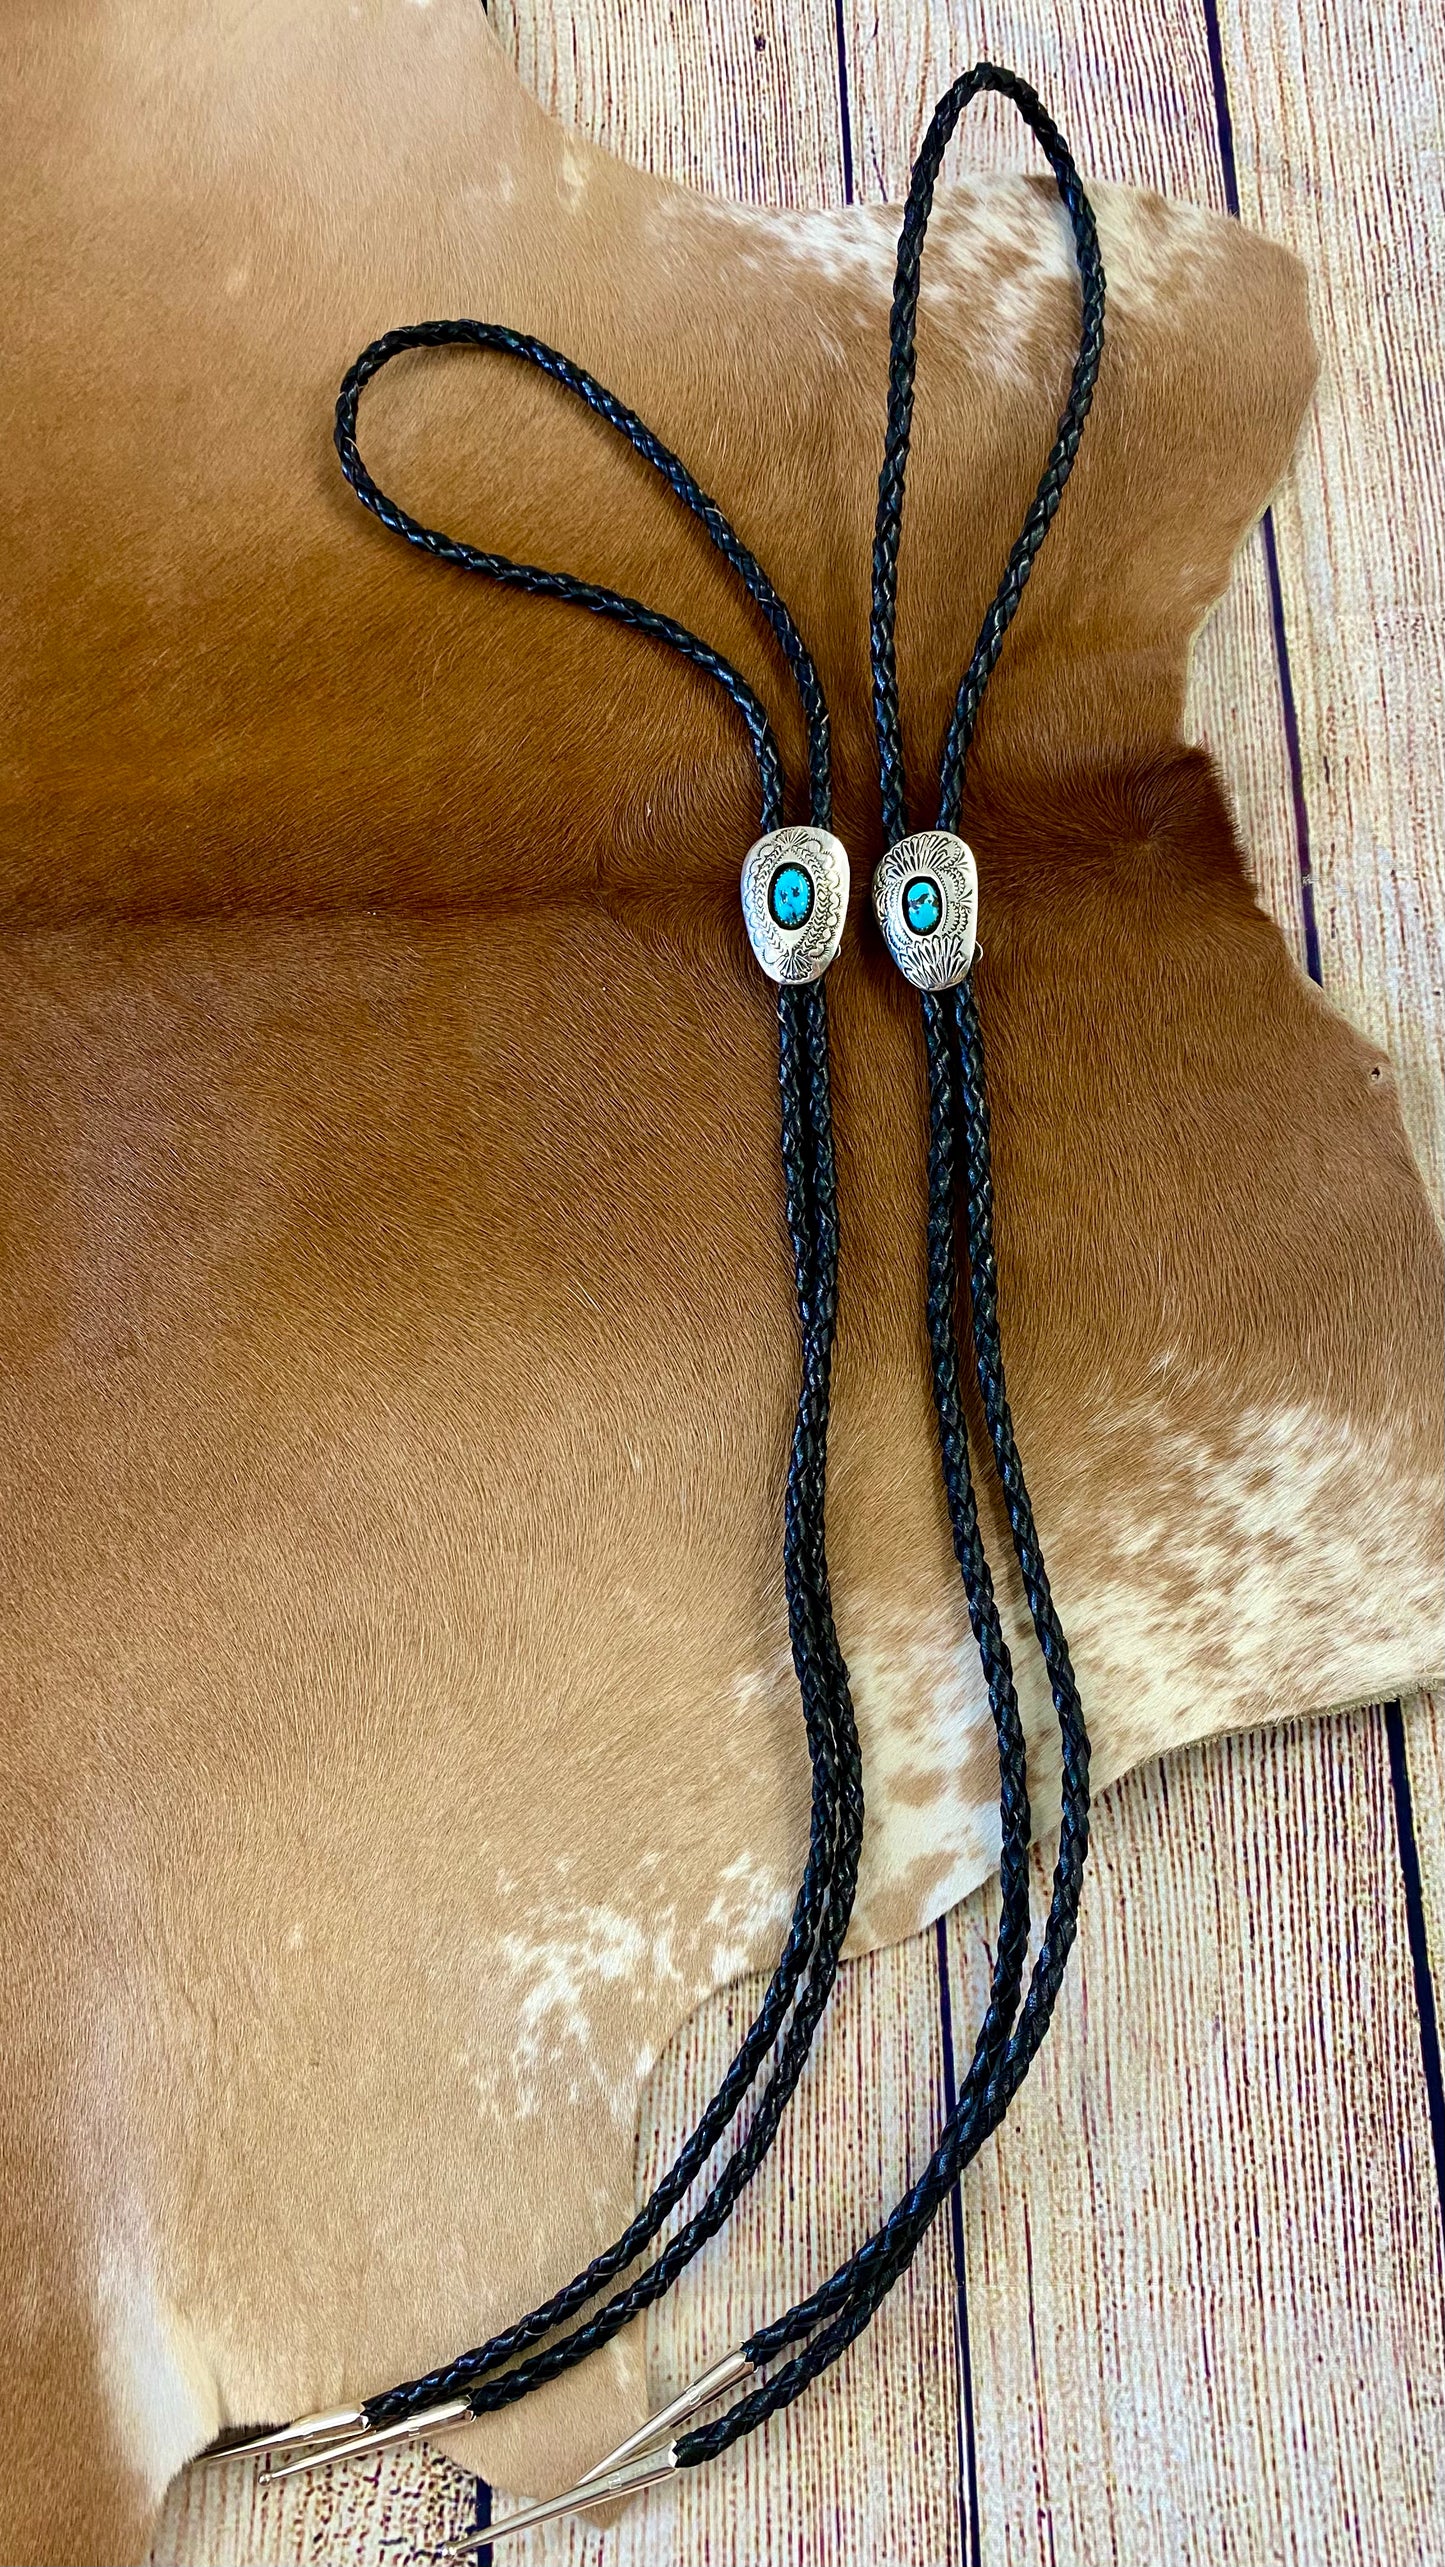 Black bolo tie necklace with single turquoise stone. A beautiful statement piece to add to your jewelry or formal attire collection. Bolo tie silver pendant with turquoise is adjustable. It can be slide up and down the leather bolo strands. The Angelo Turquoise Bolo Tie | Western Native Made Bolo 